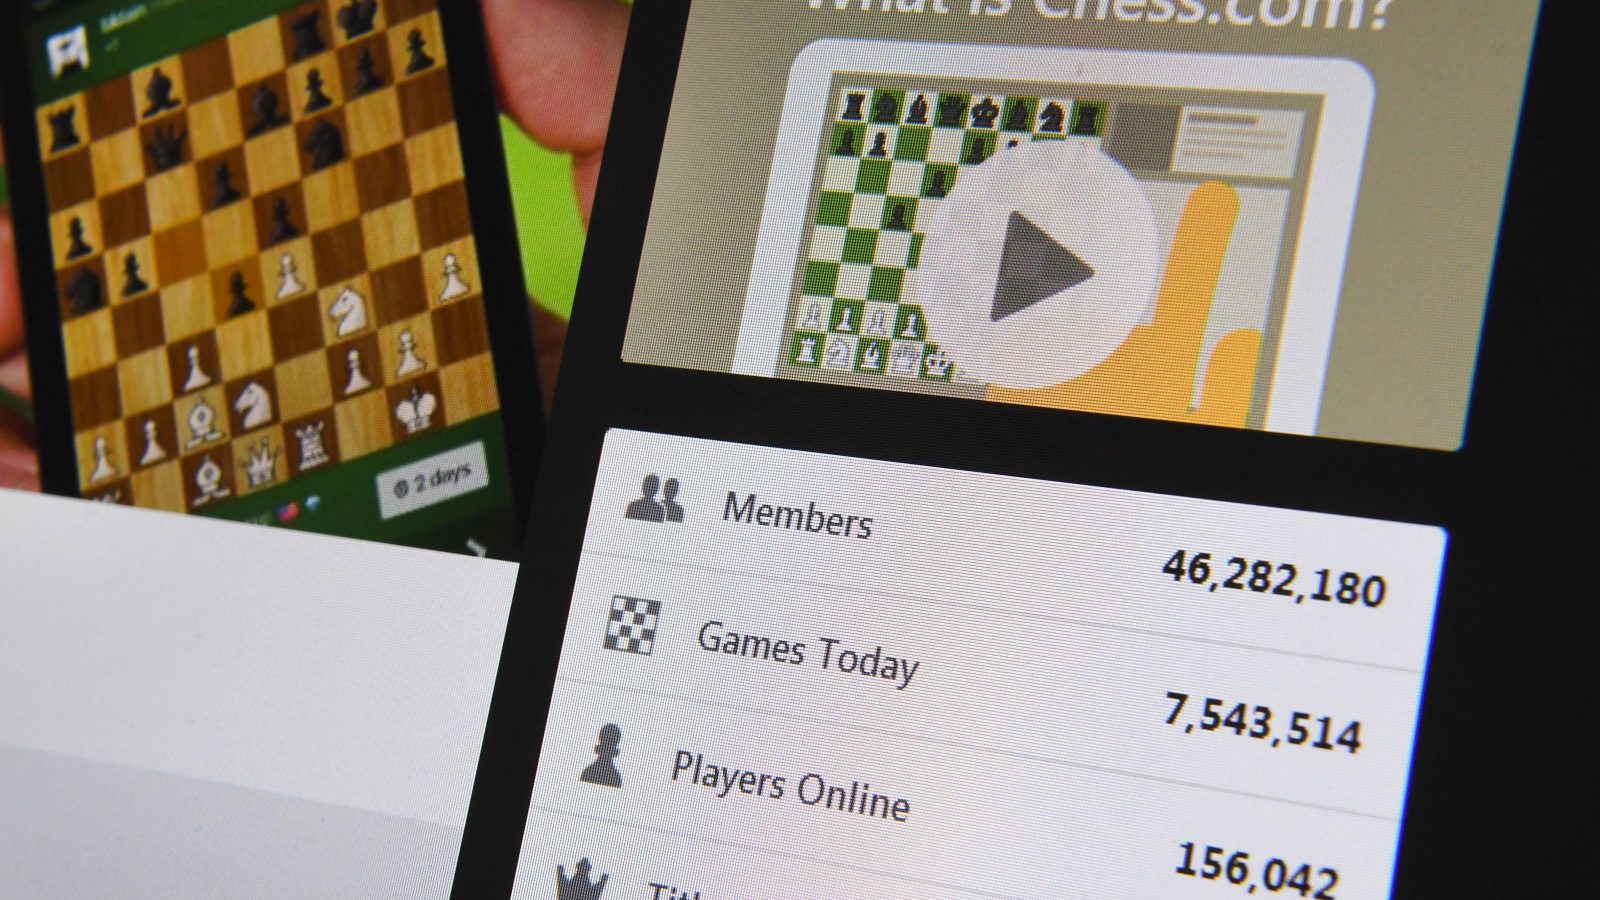 Online chess is more popular than ever' - U-Today